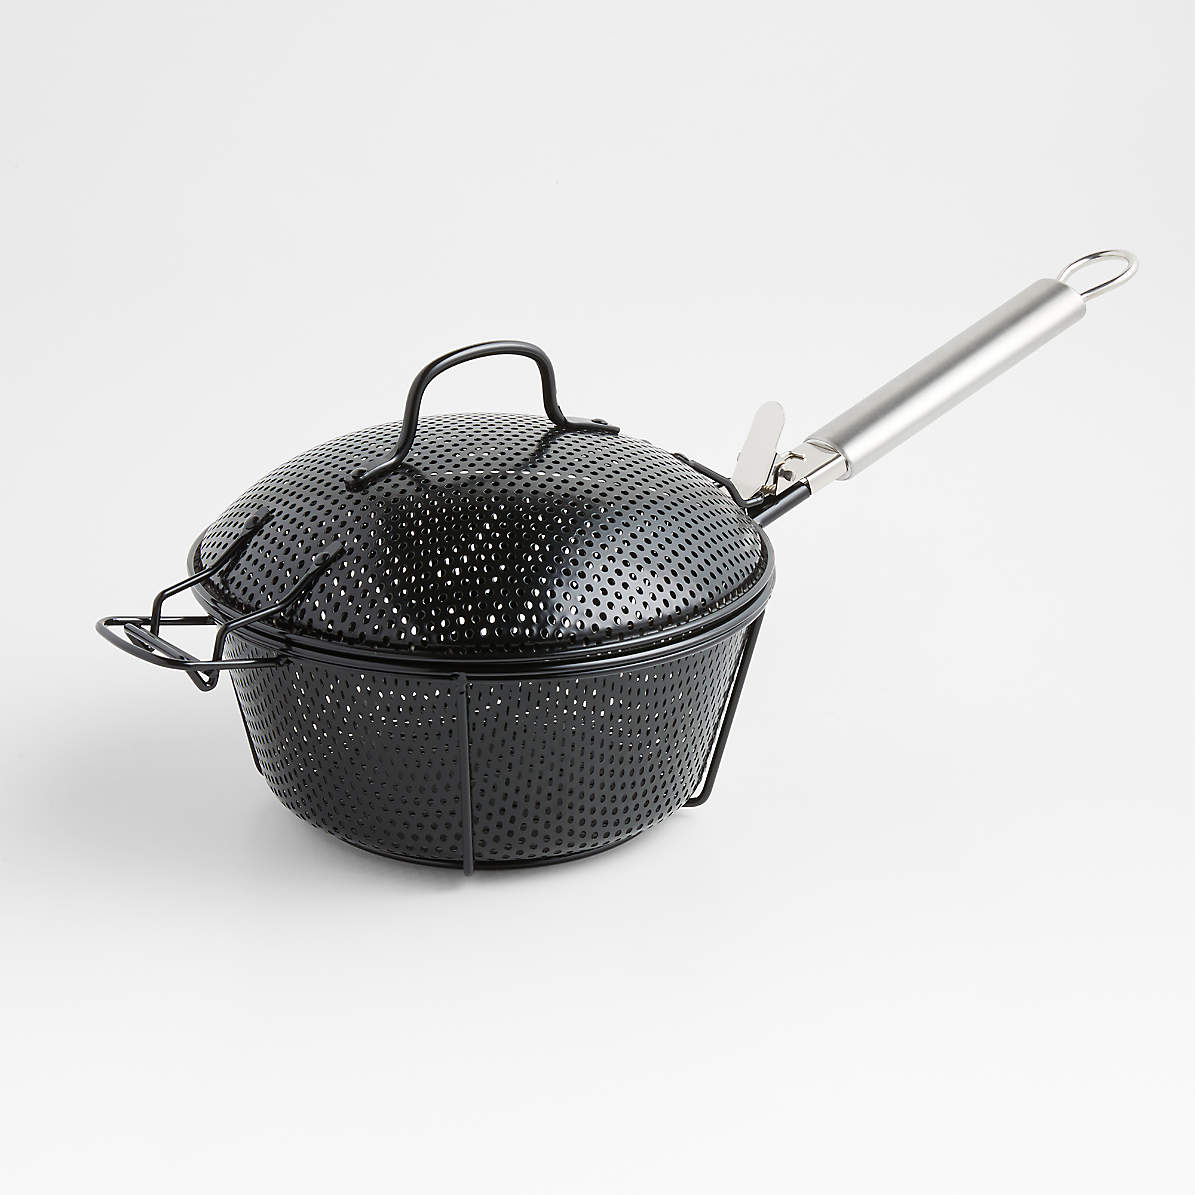 Grill Basket - Large Non-Stick Grill Skillet with Handle for Outdoor G –  Grillers Choice Brands